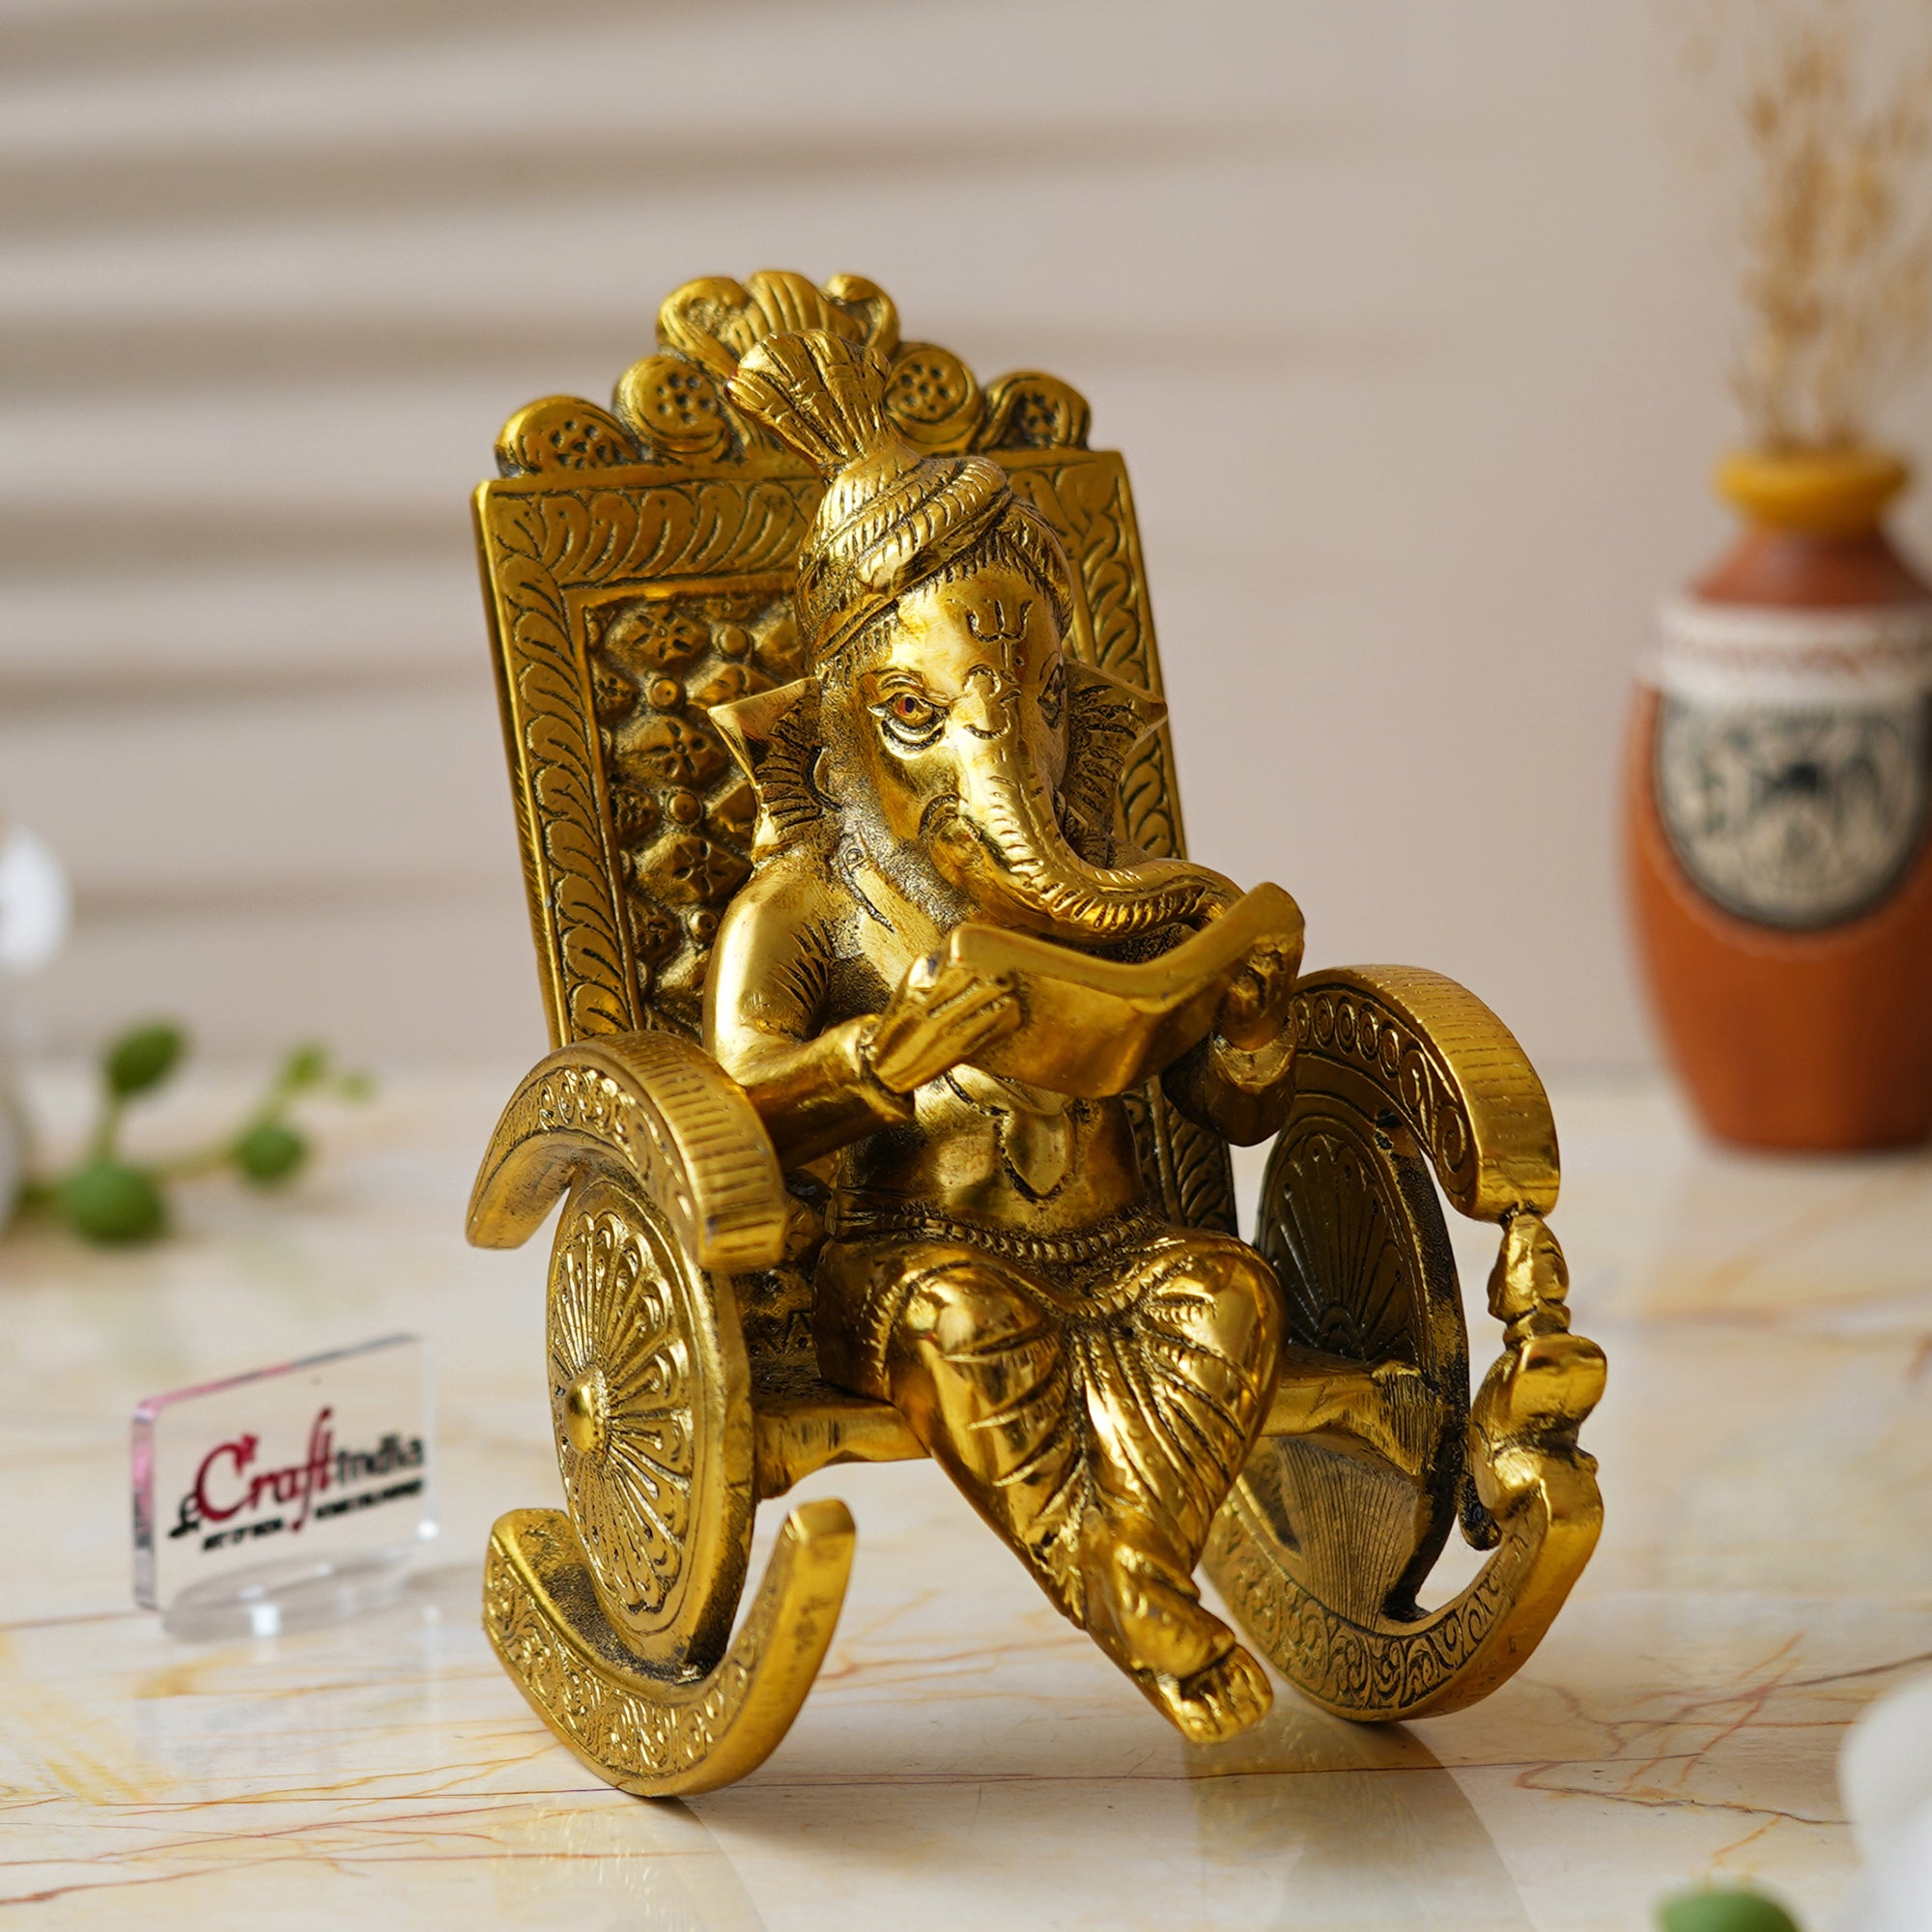 Golden Metal Handcrafted Lord Ganesha Idol Reading Book on Rocking Chair 1